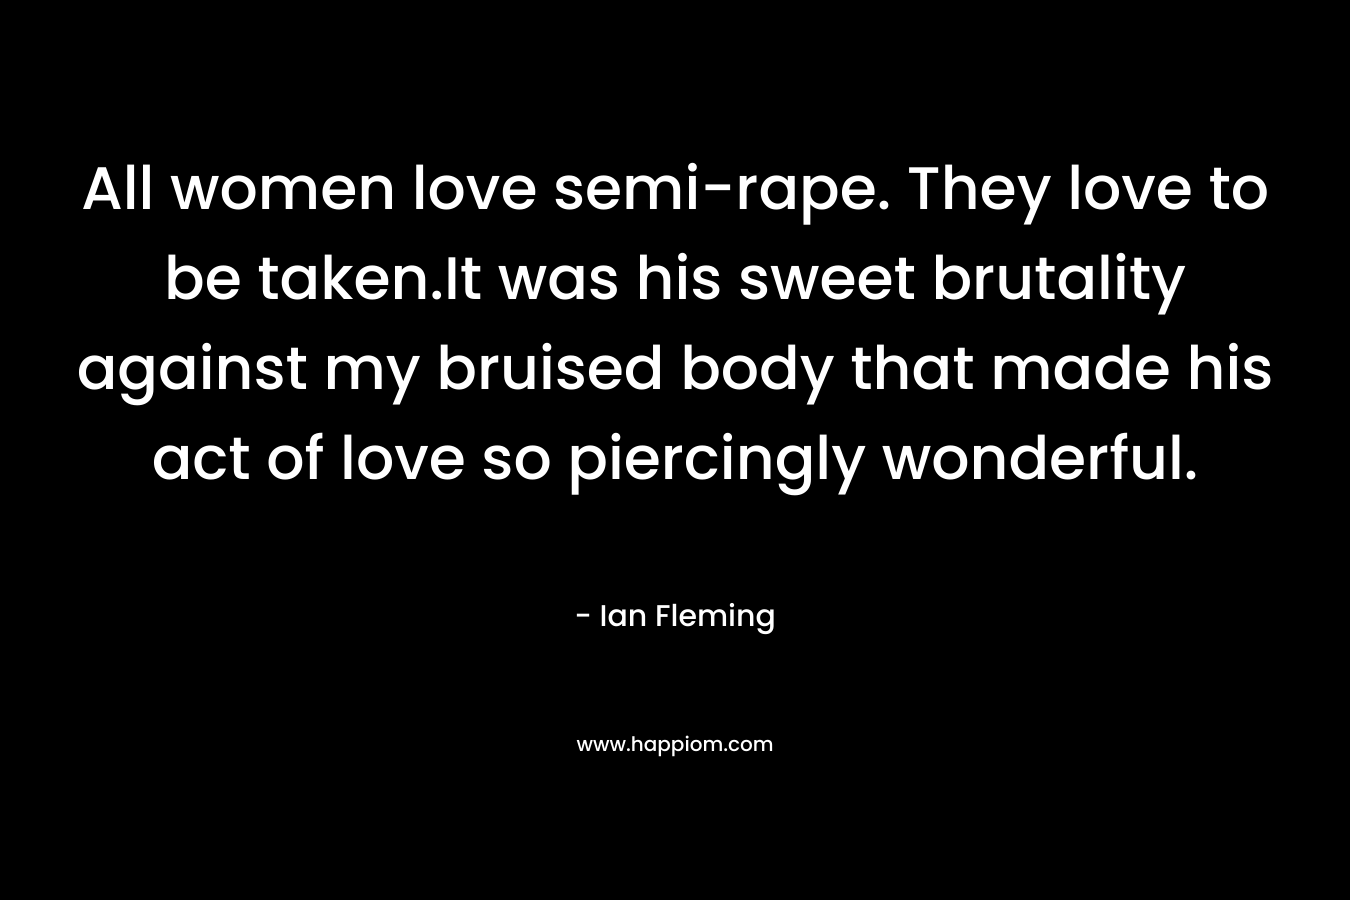 All women love semi-rape. They love to be taken.It was his sweet brutality against my bruised body that made his act of love so piercingly wonderful.